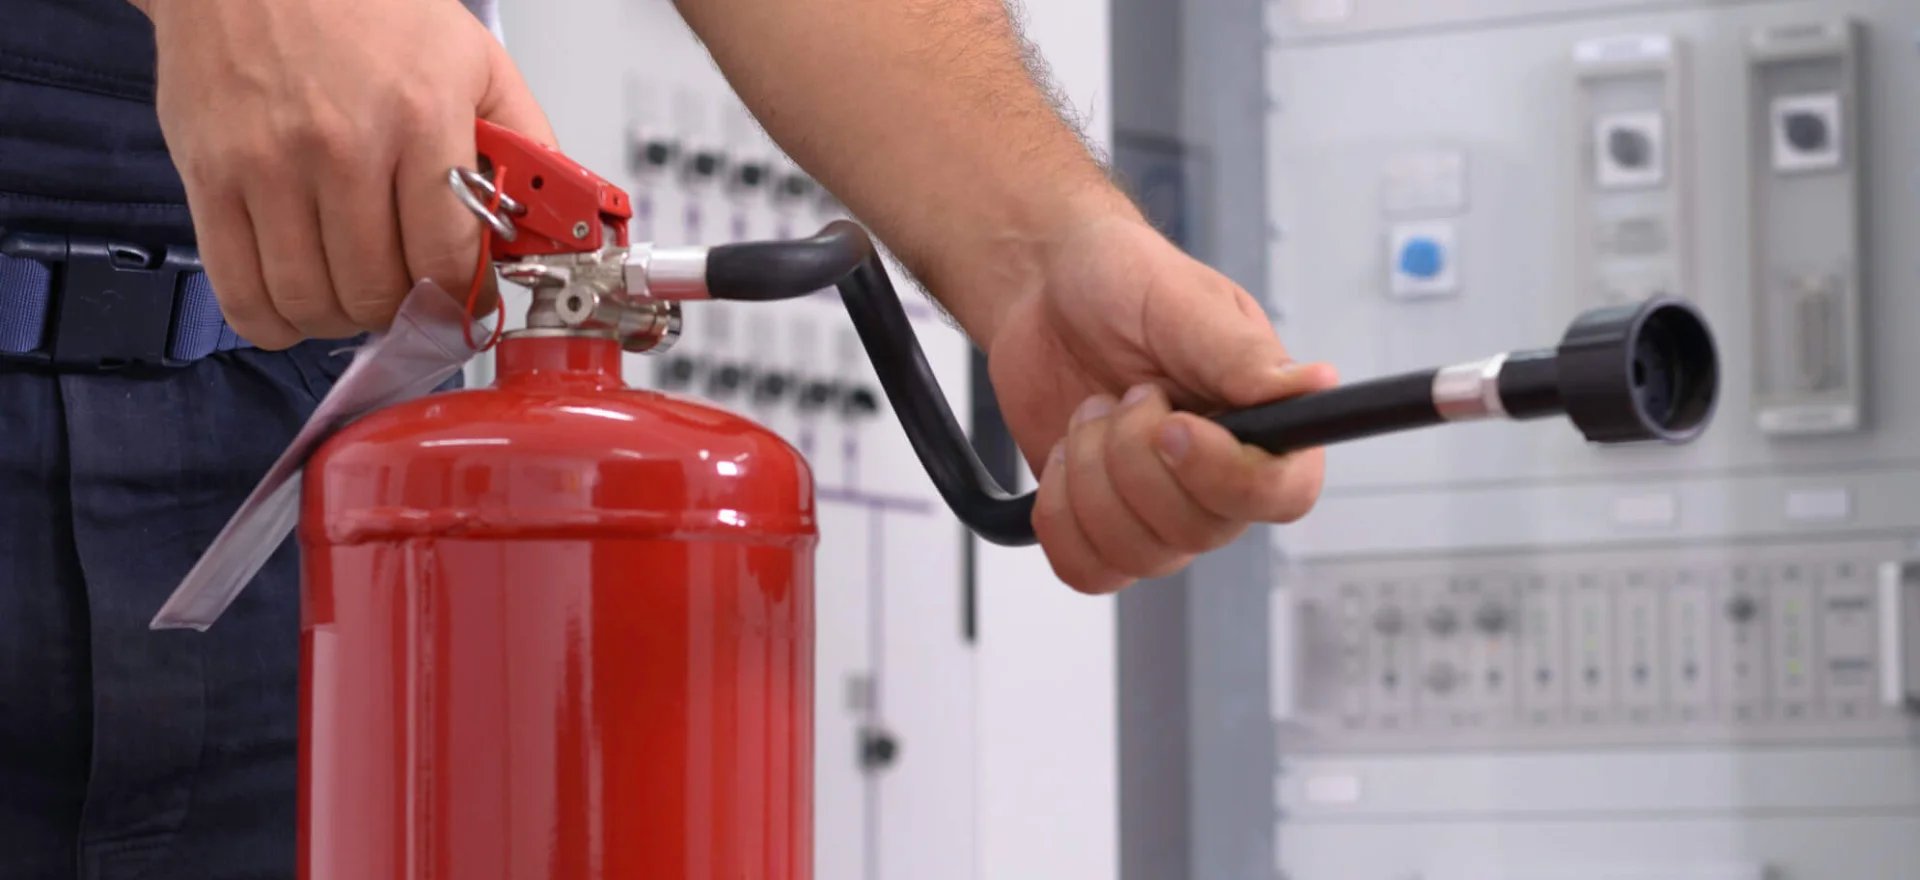 Wet Chemical Fire Extinguisher (1)